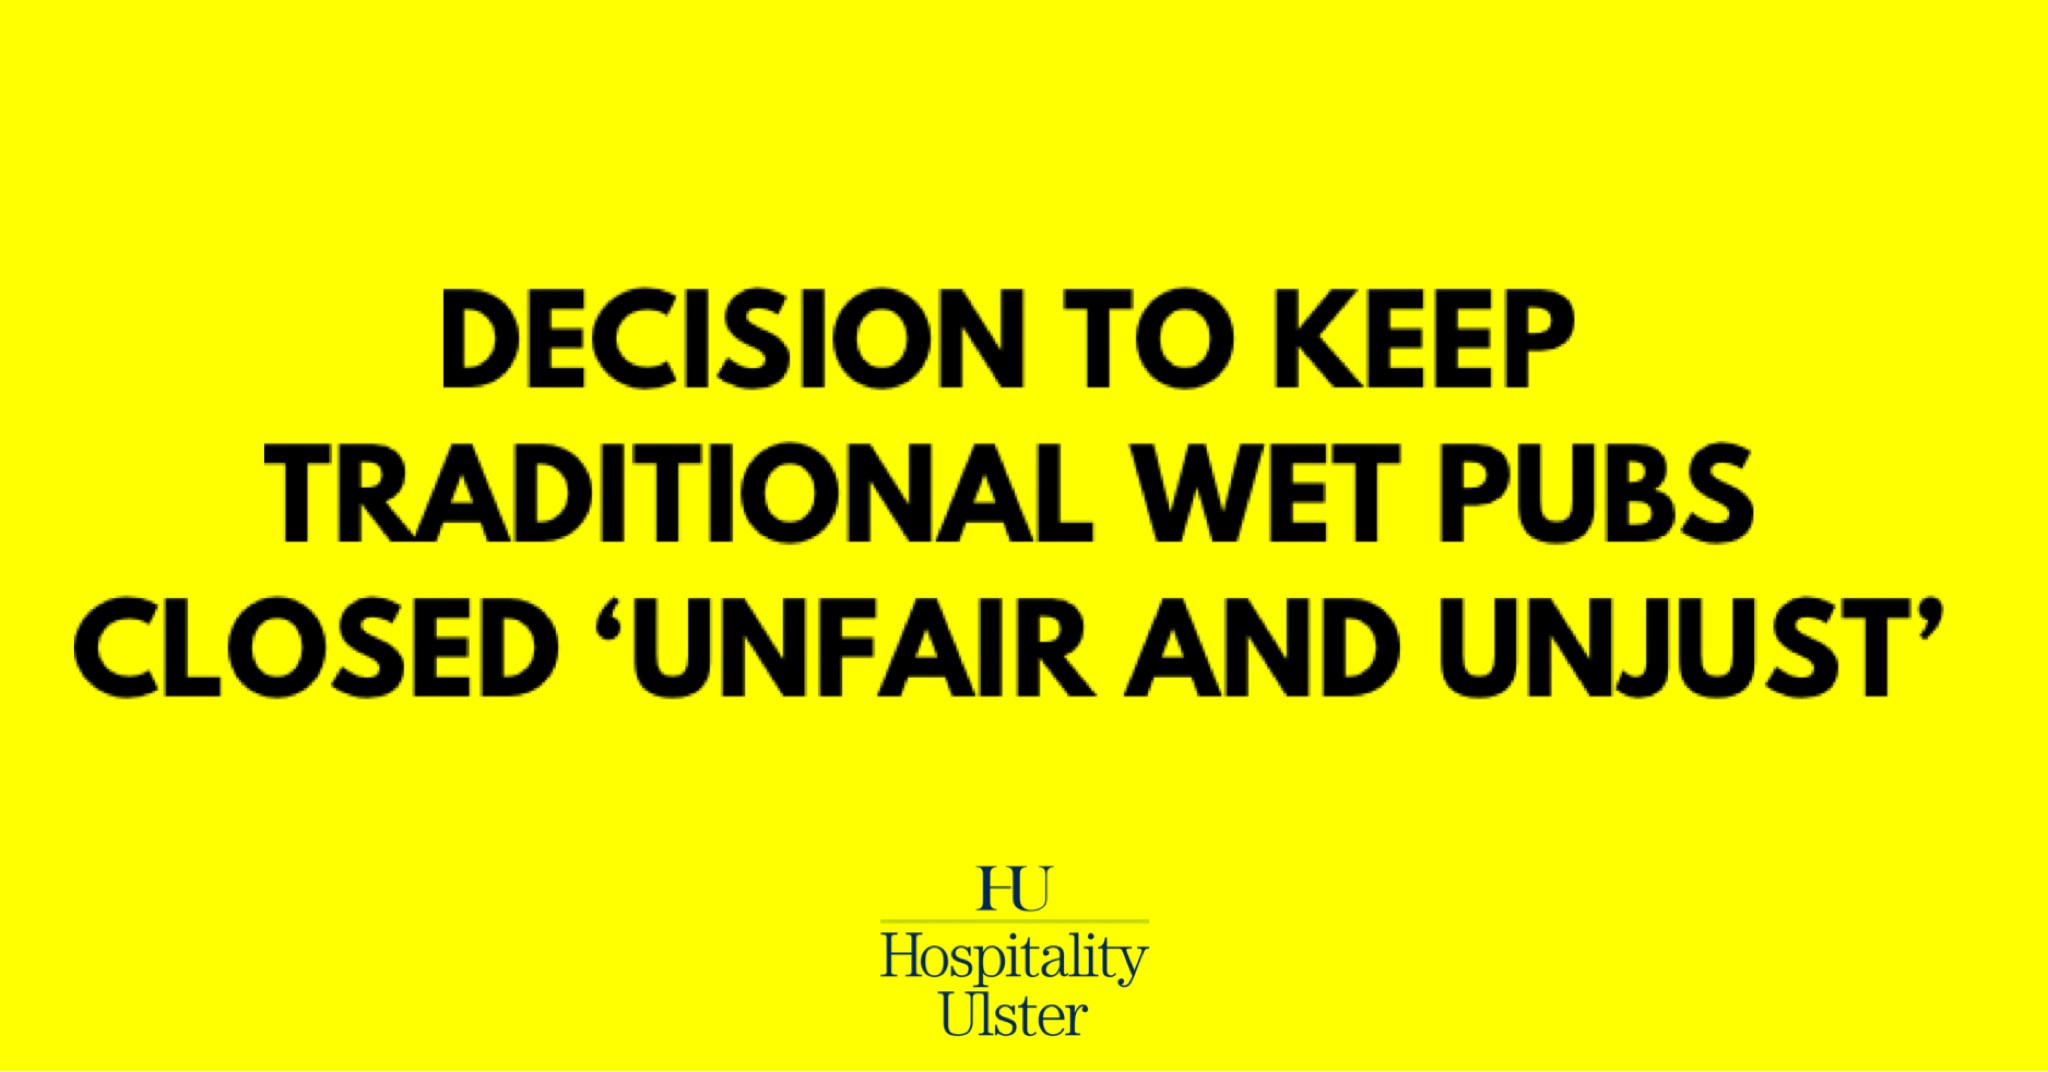 DECISION TO KEEP TRADITIONAL WET PUBS CLOSED UNFAIR AND UNJUST